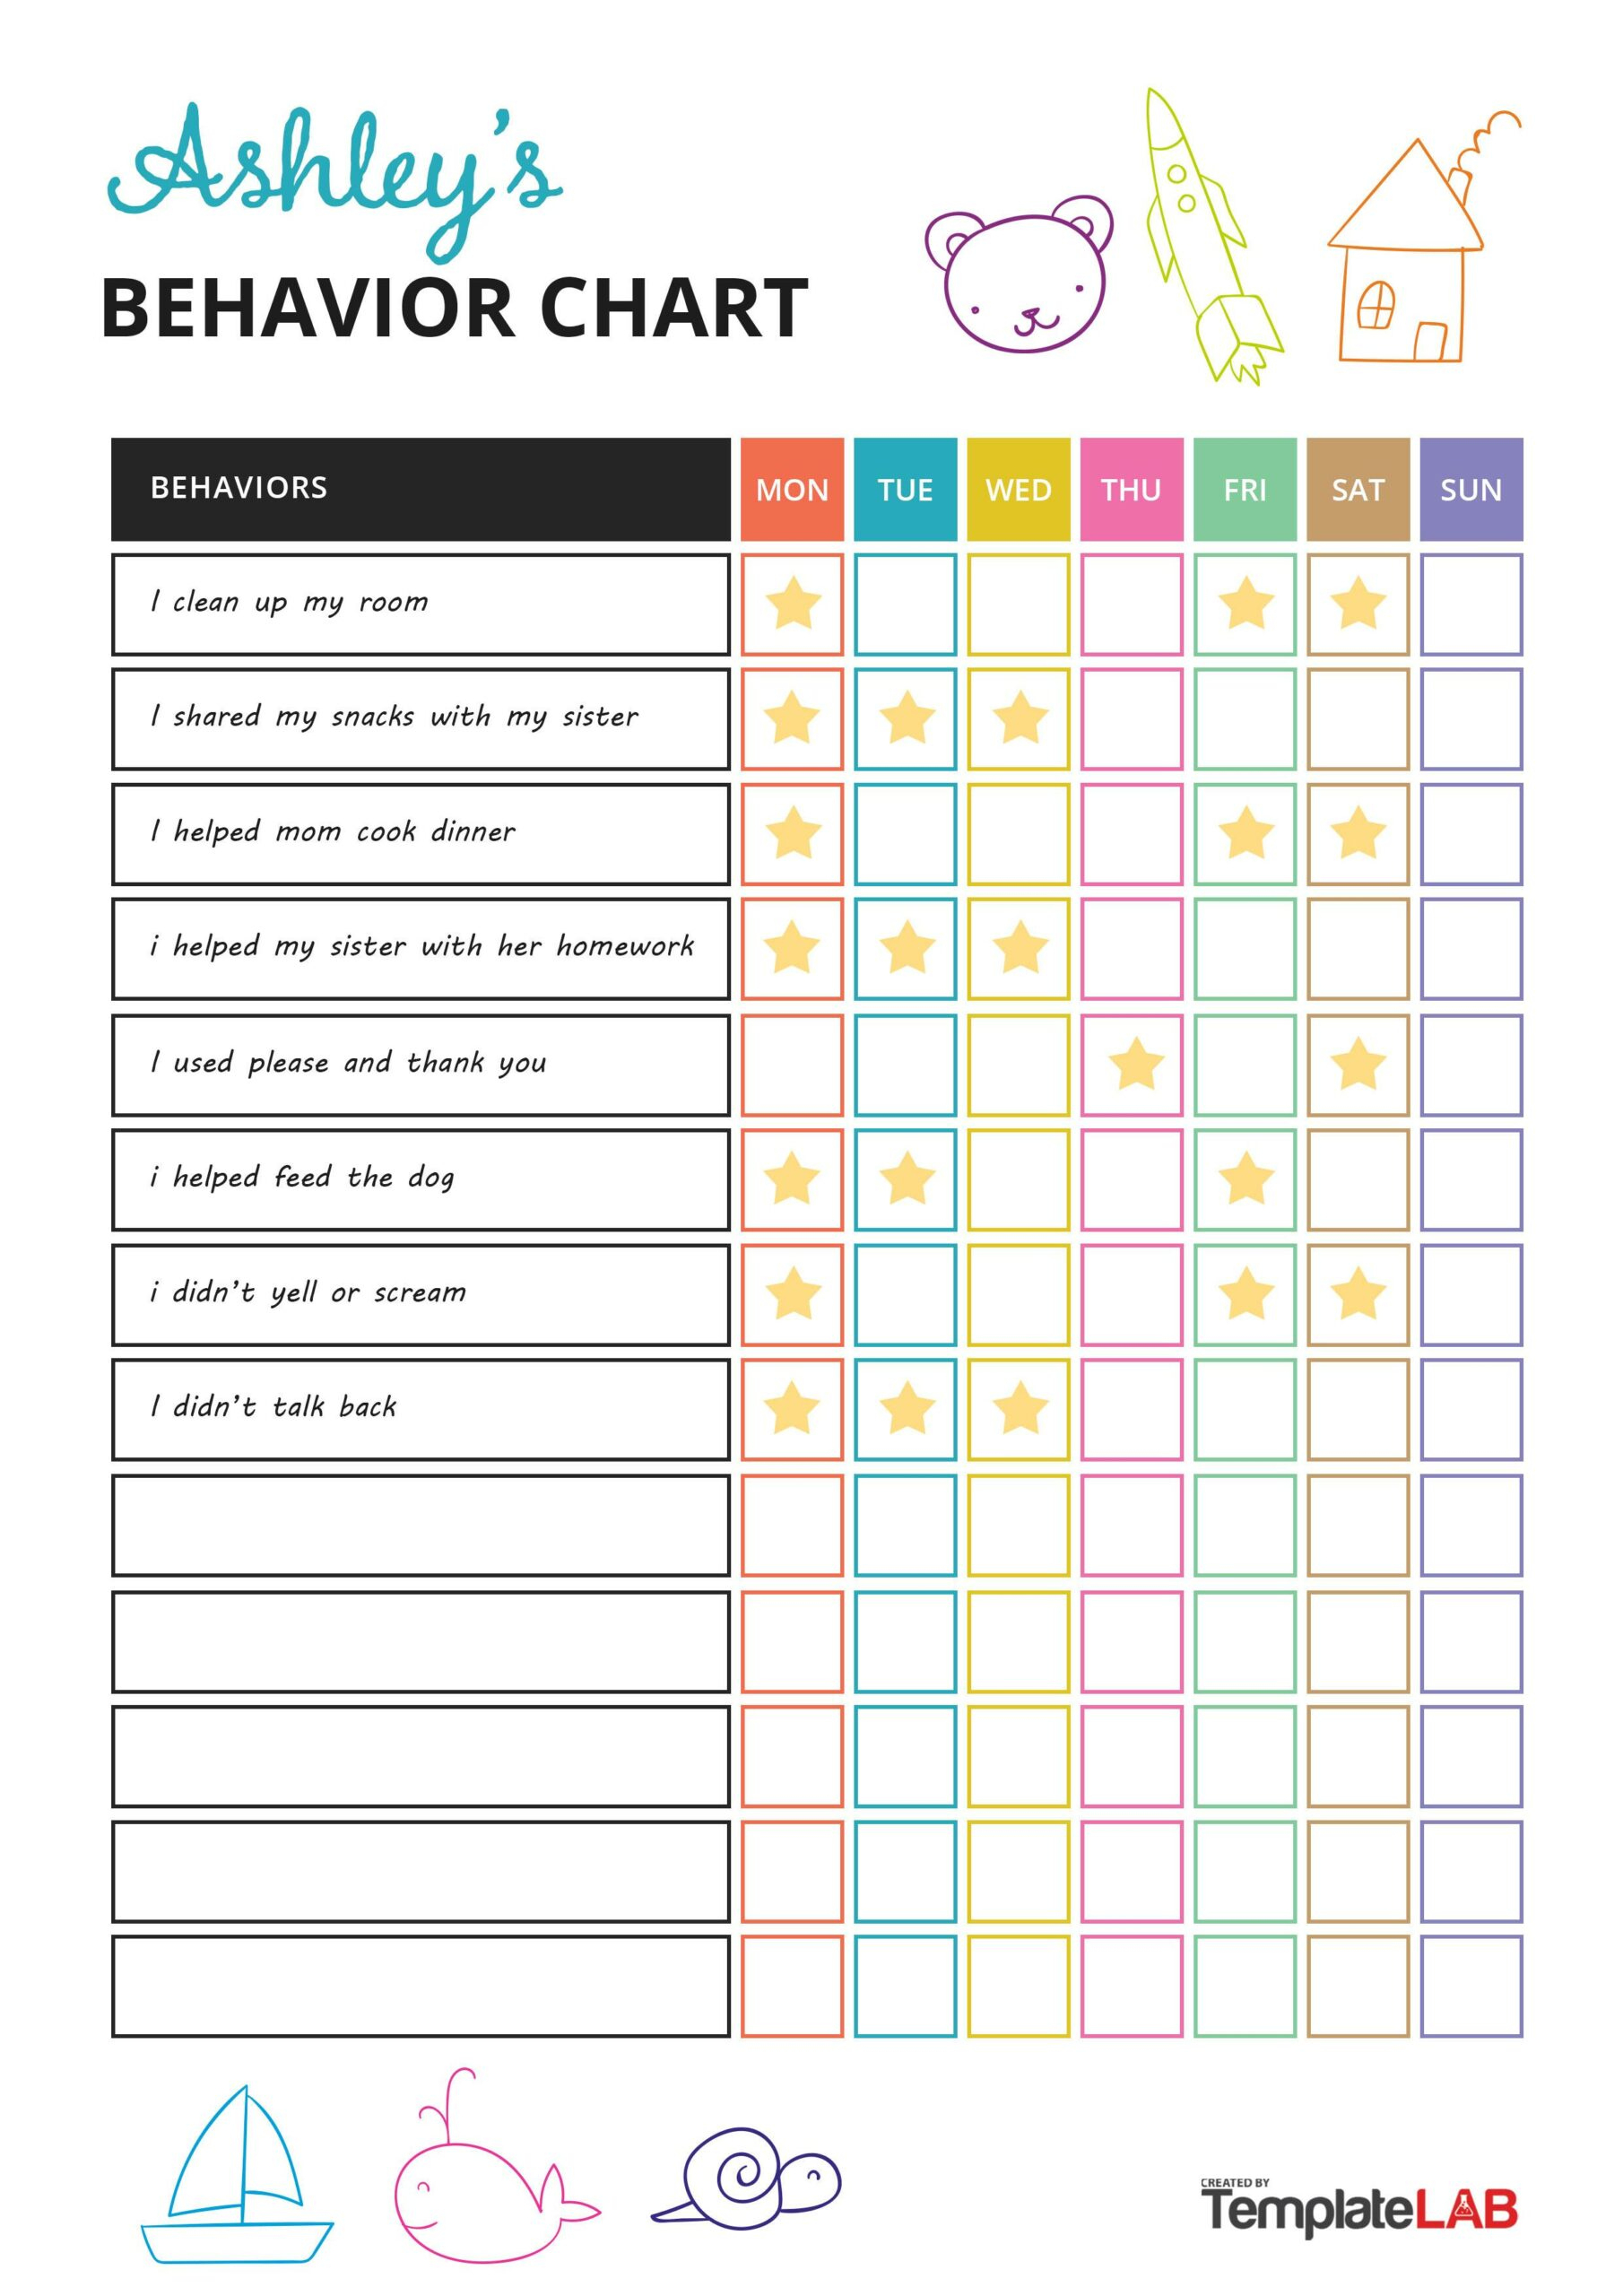 19 Printable Behavior Chart Templates [For Kids] ᐅ Templatelab with regard to Free Printable Behavior Charts For Elementary Students